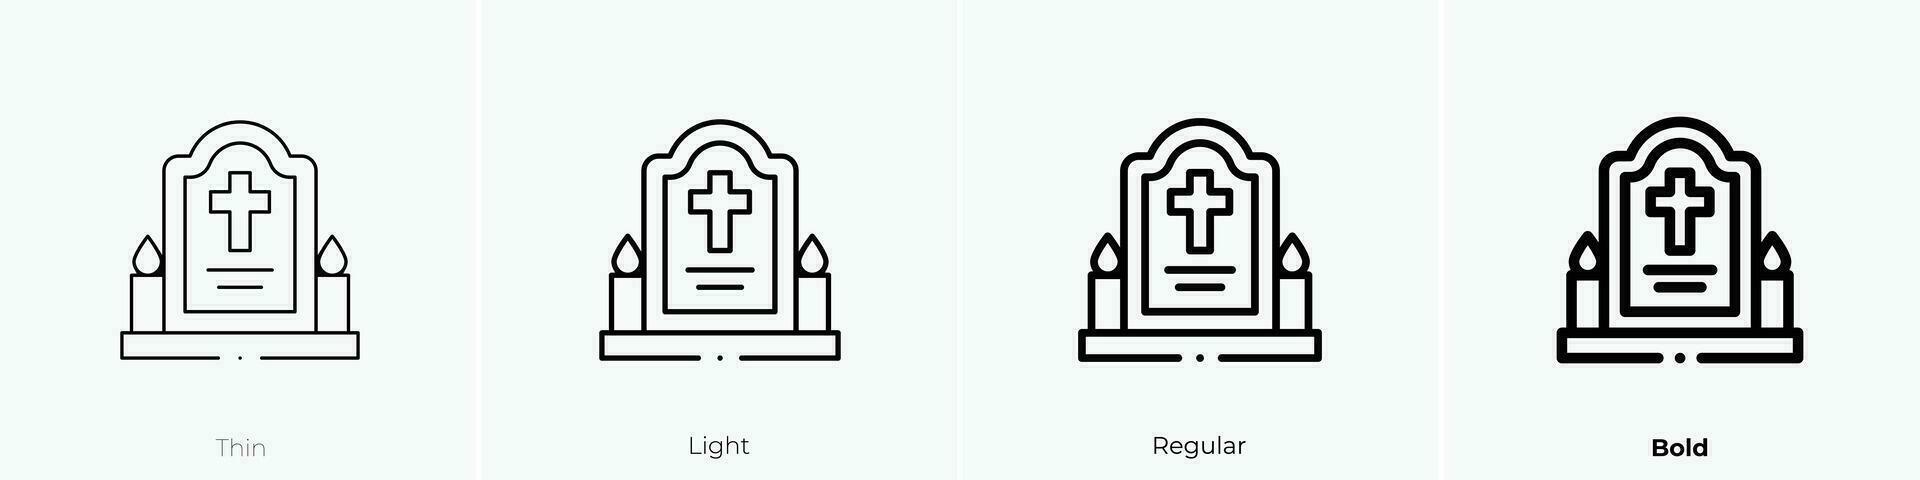 tombstone icon. Thin, Light, Regular And Bold style design isolated on white background vector